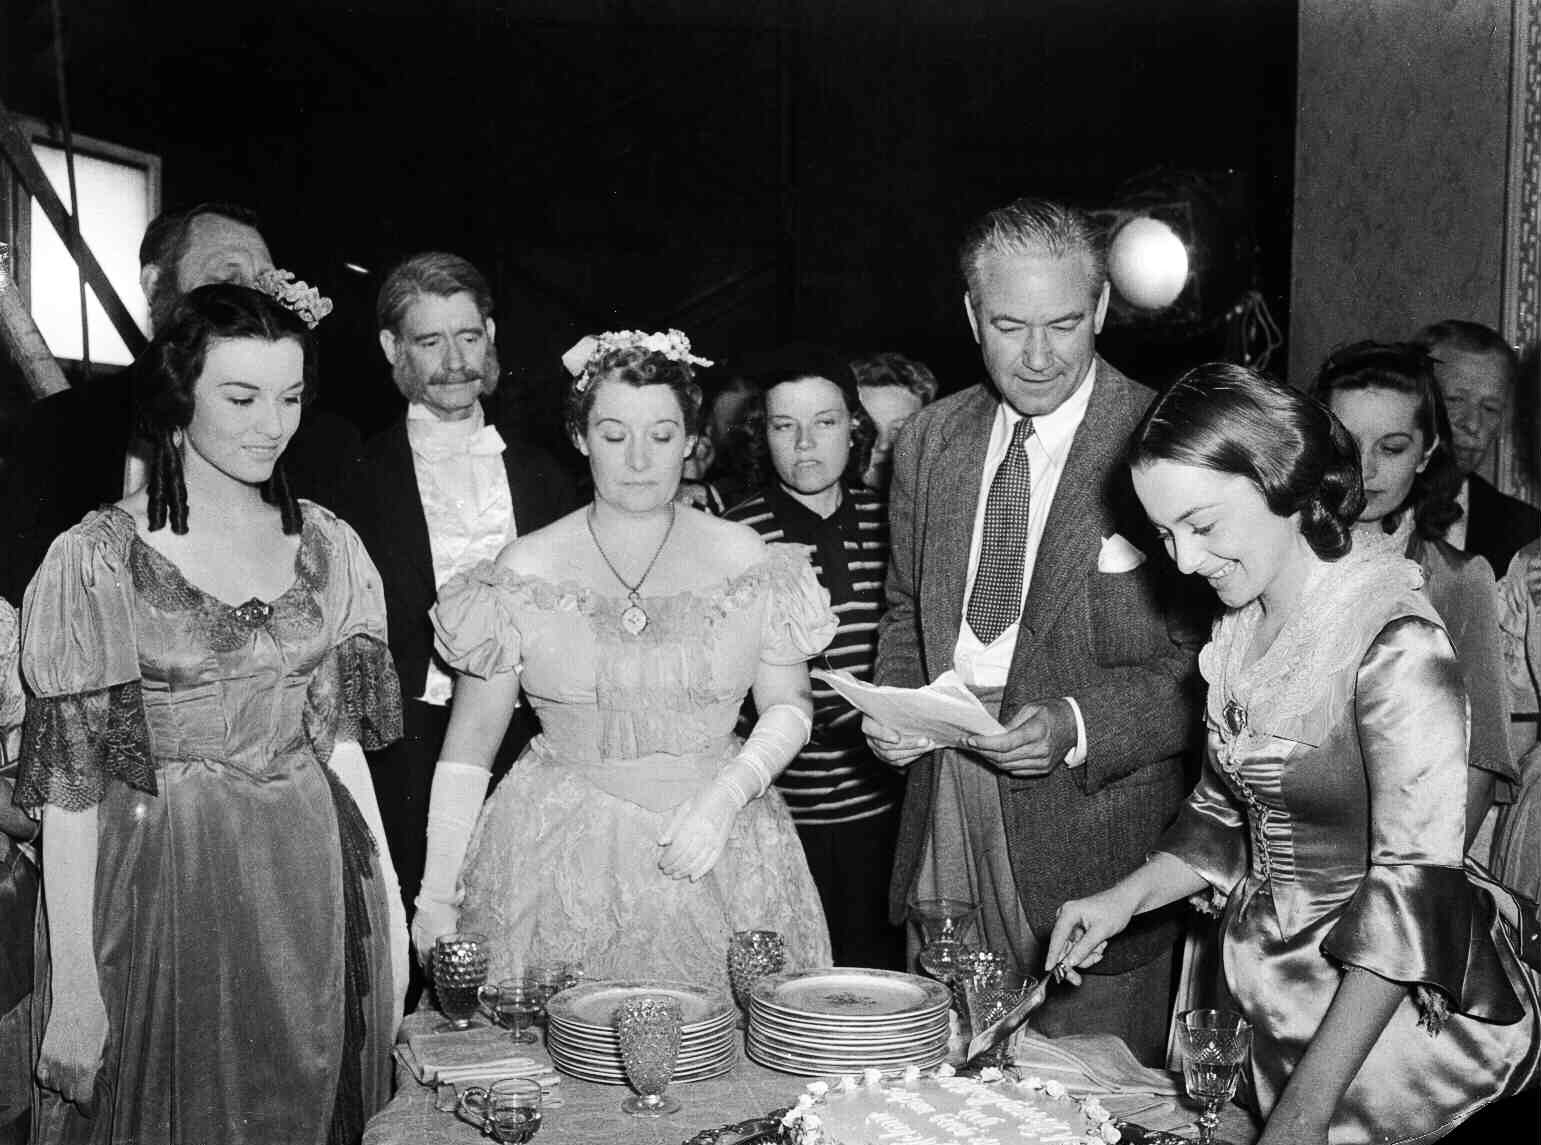 Victor Fleming, second from right, and Olivia de Havilland, right, on the set of Gone with the Wind in 1939.